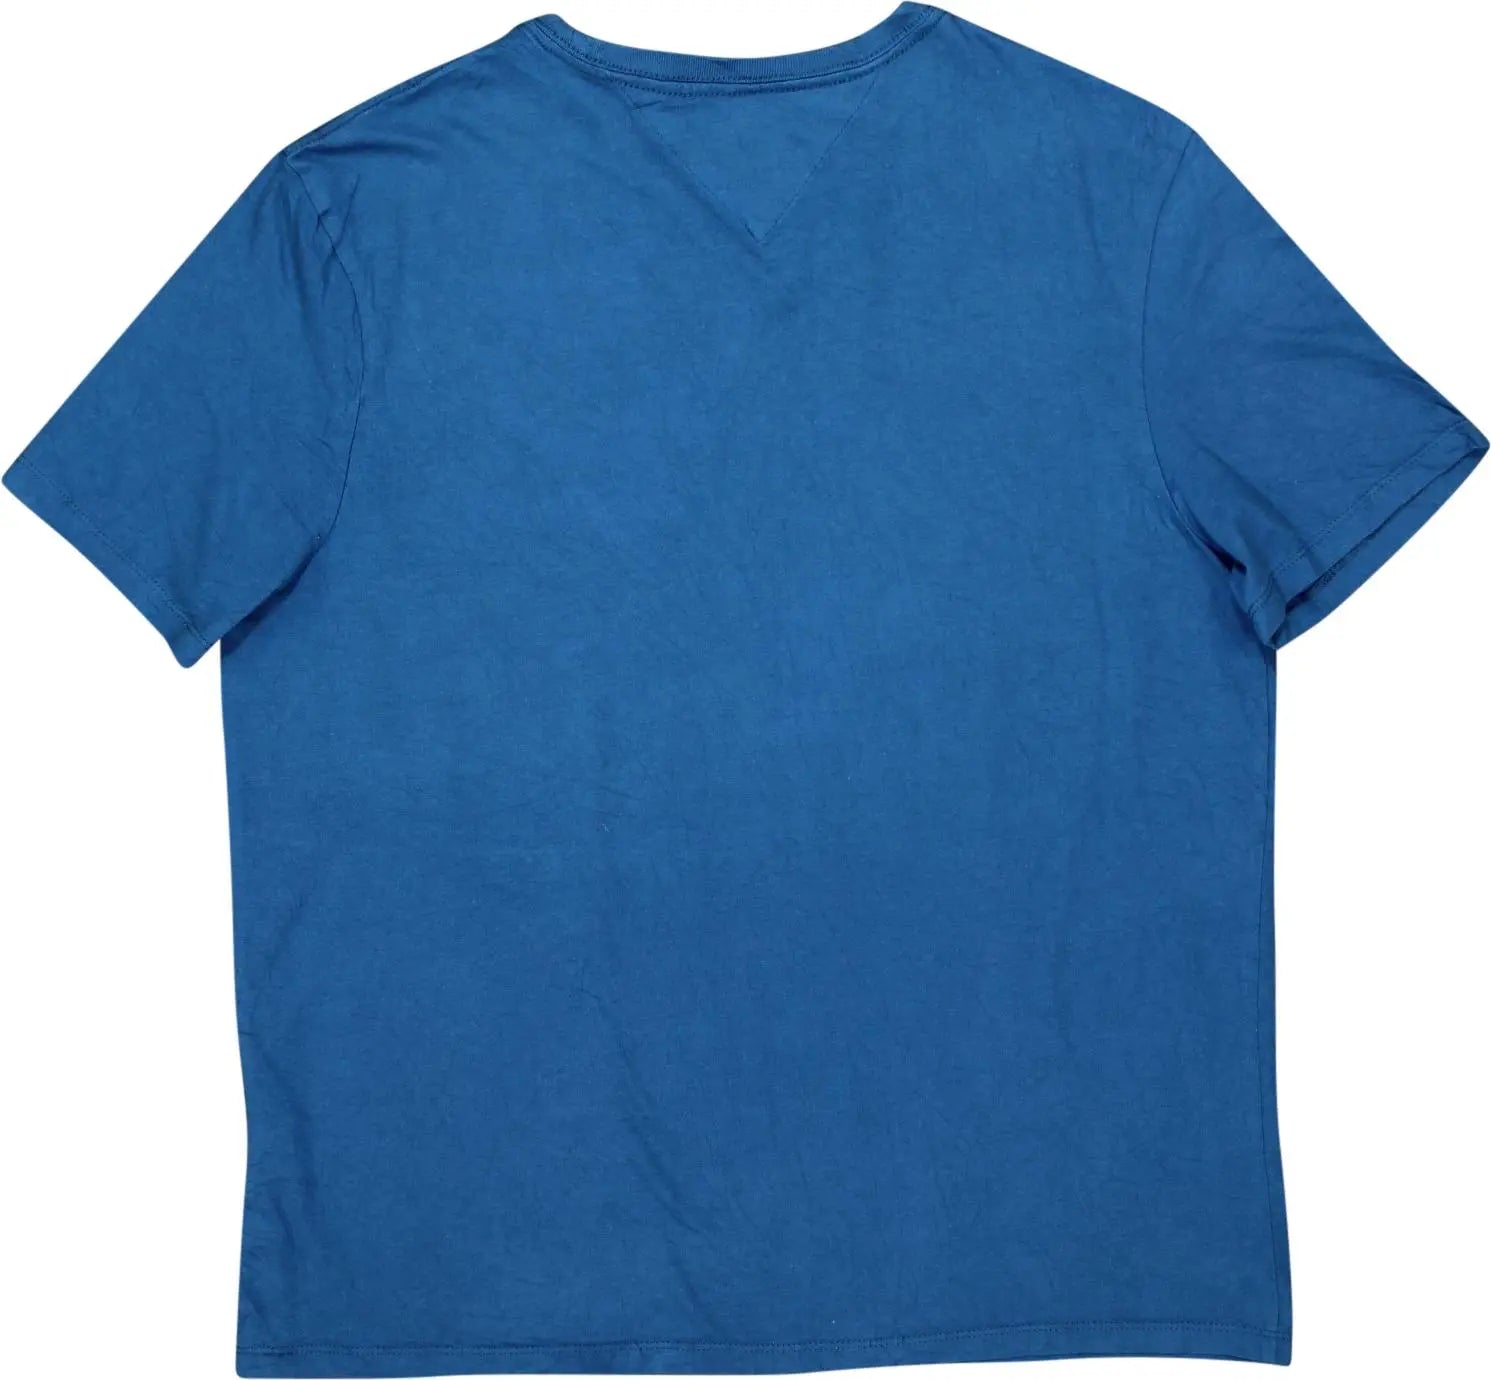 Tommy Hilfiger - Blue T-Shirt by Tommy Hilfiger- ThriftTale.com - Vintage and second handclothing